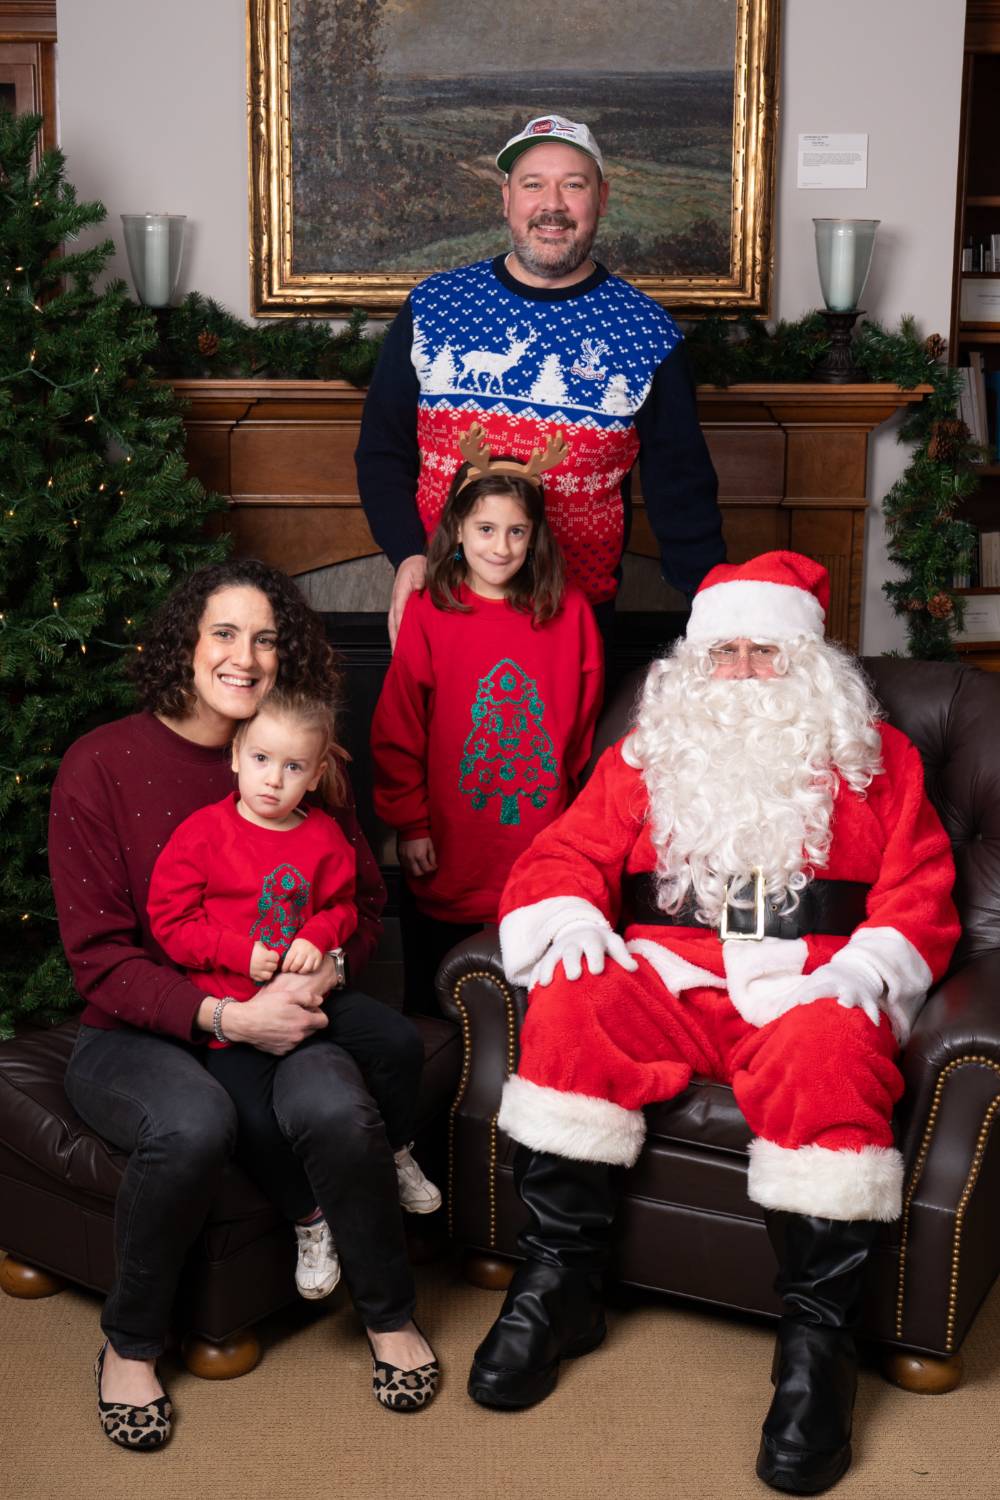 Family of four with Santa at the event.